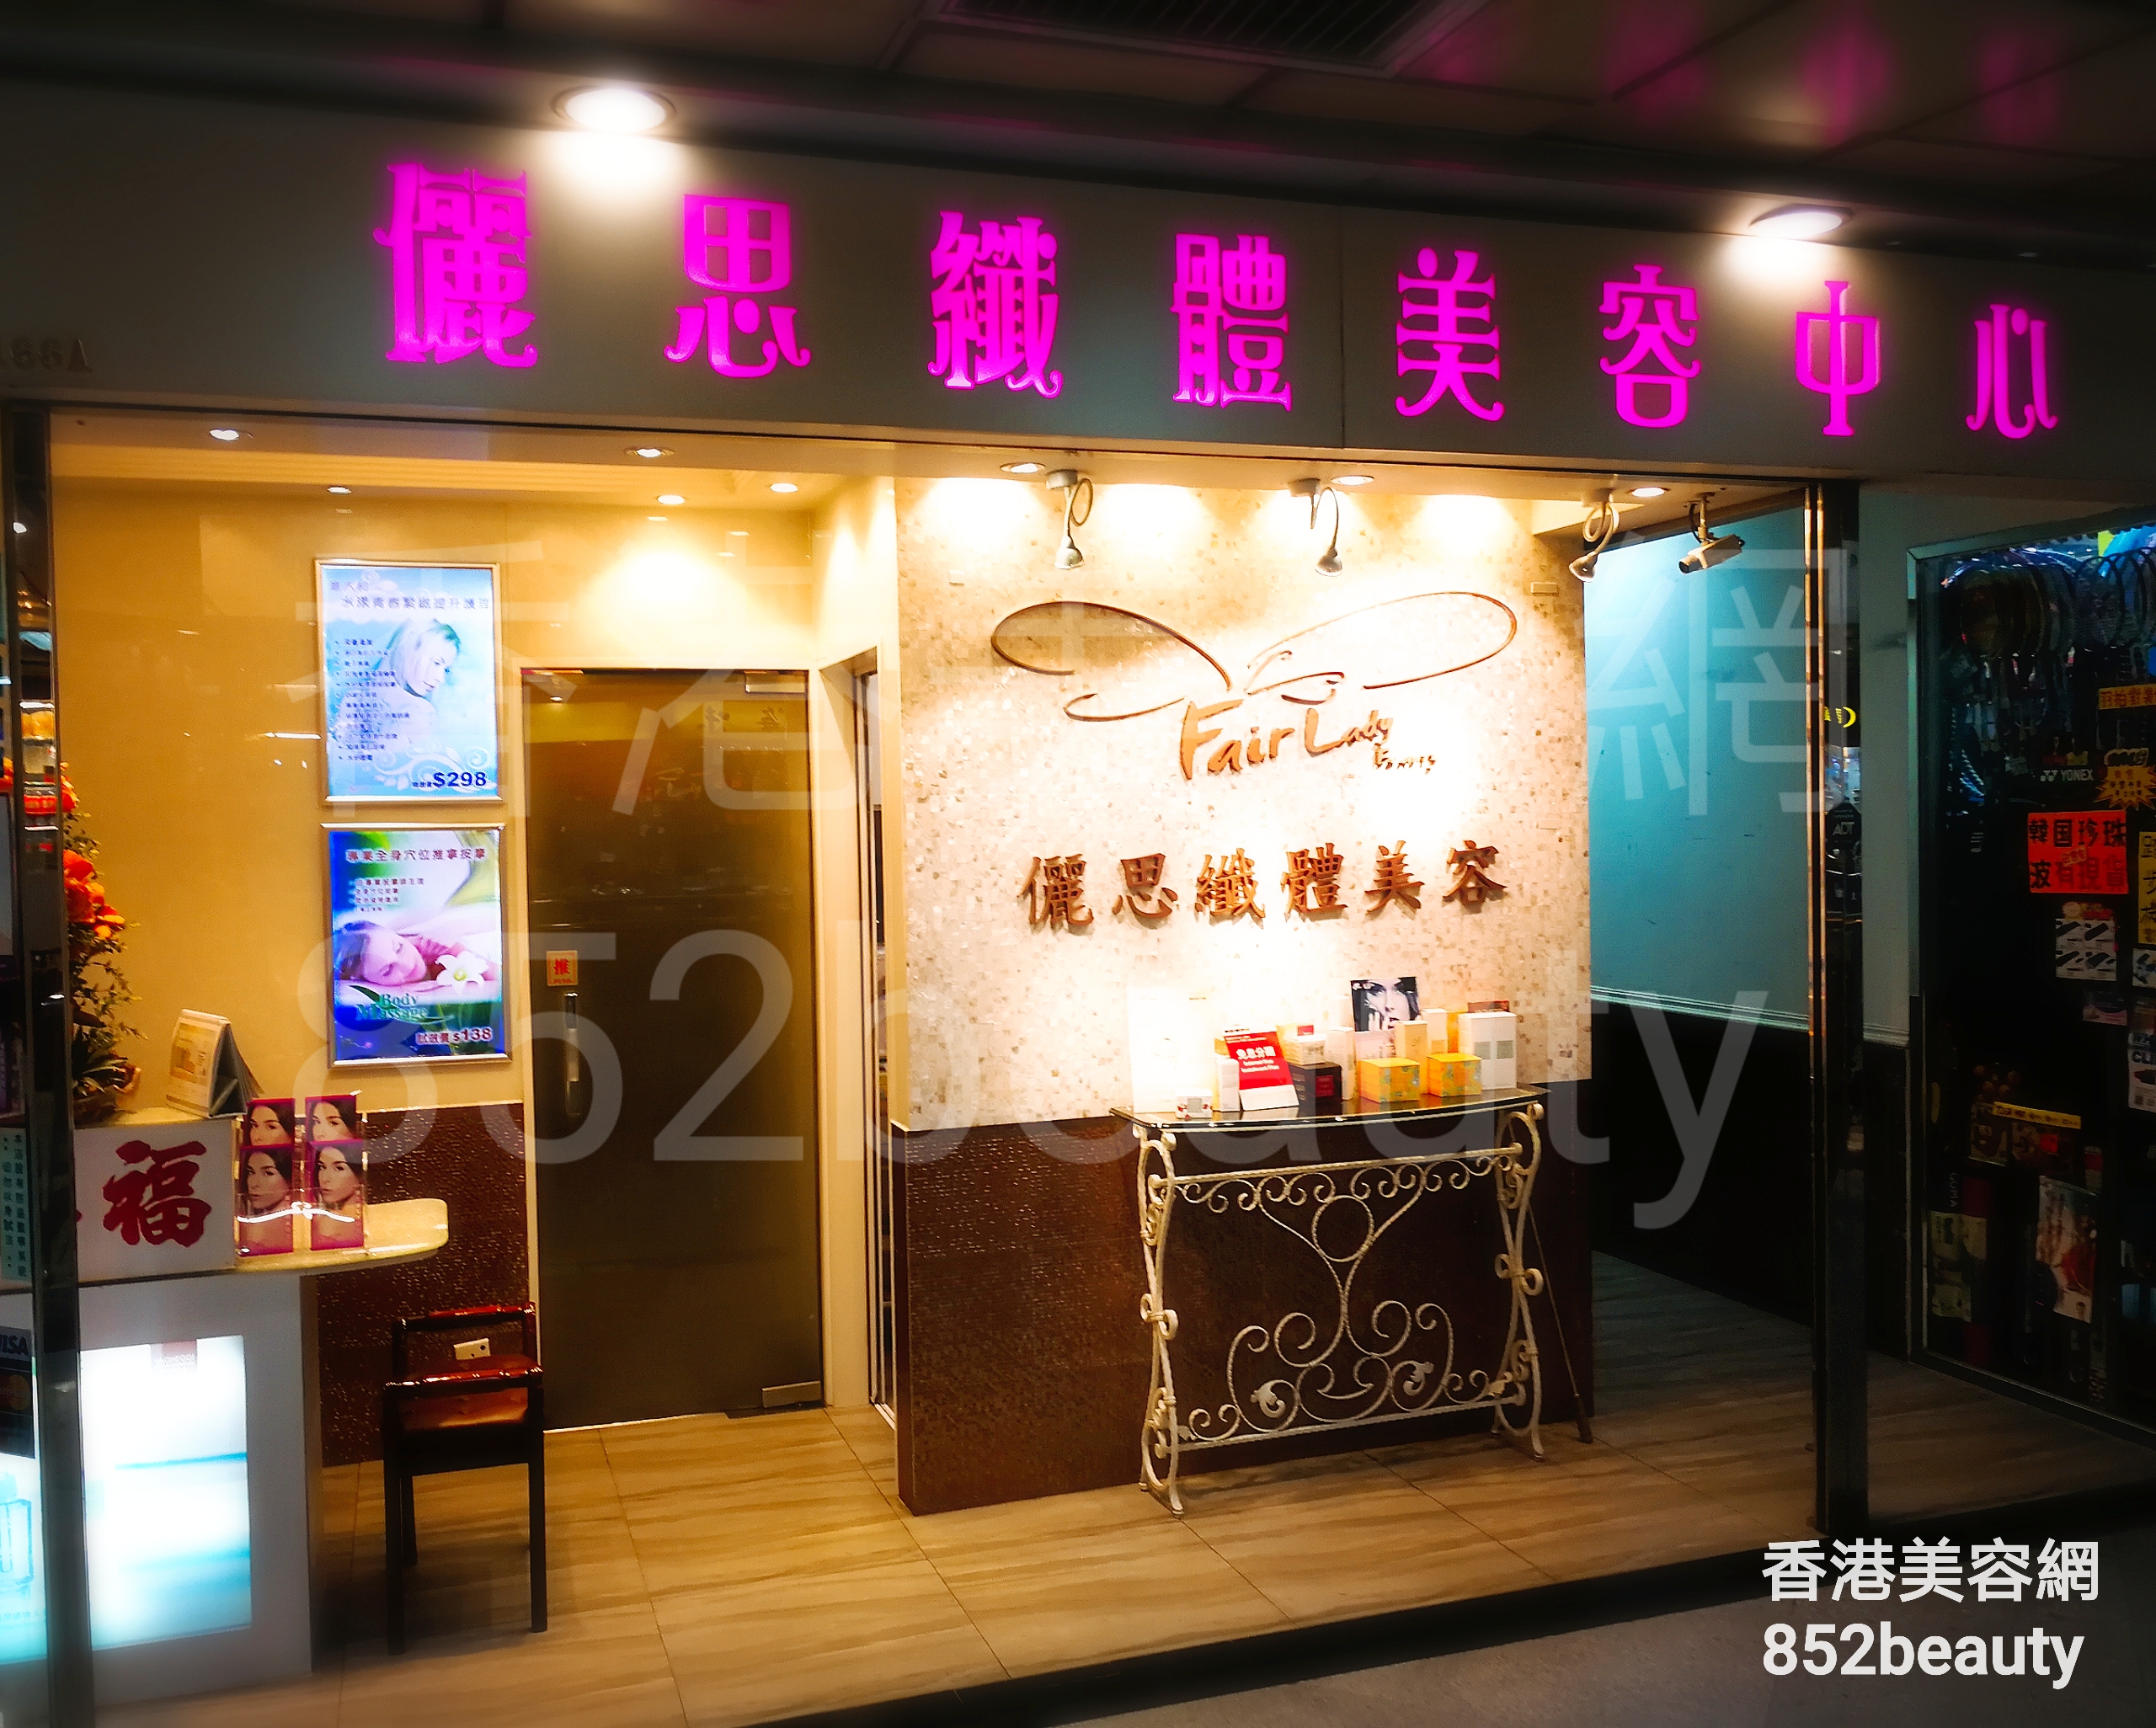 Hand and foot care: 儷思纖體美容中心 (藍田店)